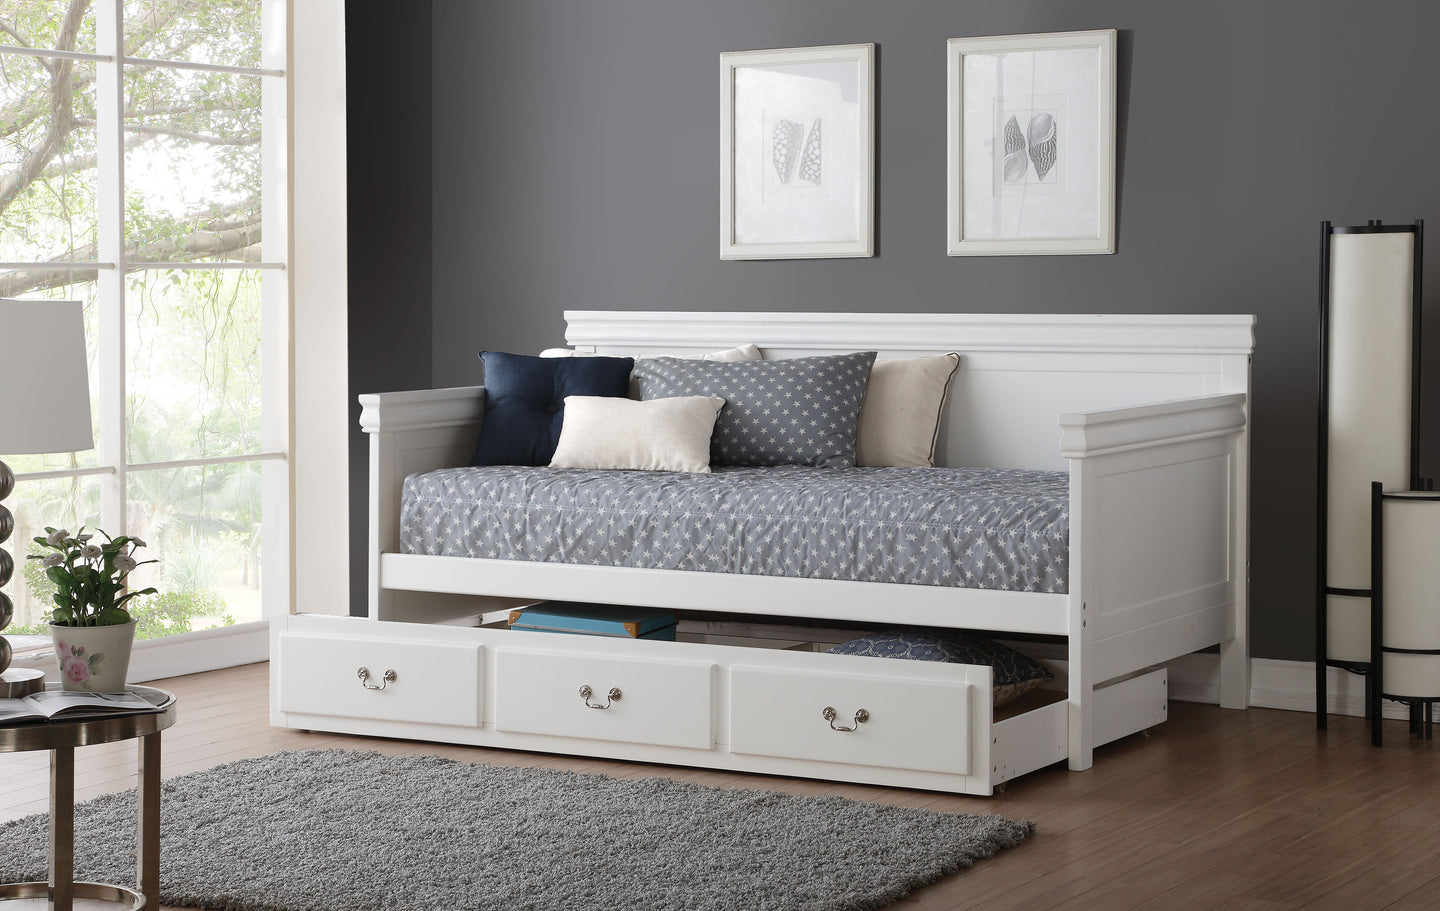 Bailee White Daybed (Twin Size)